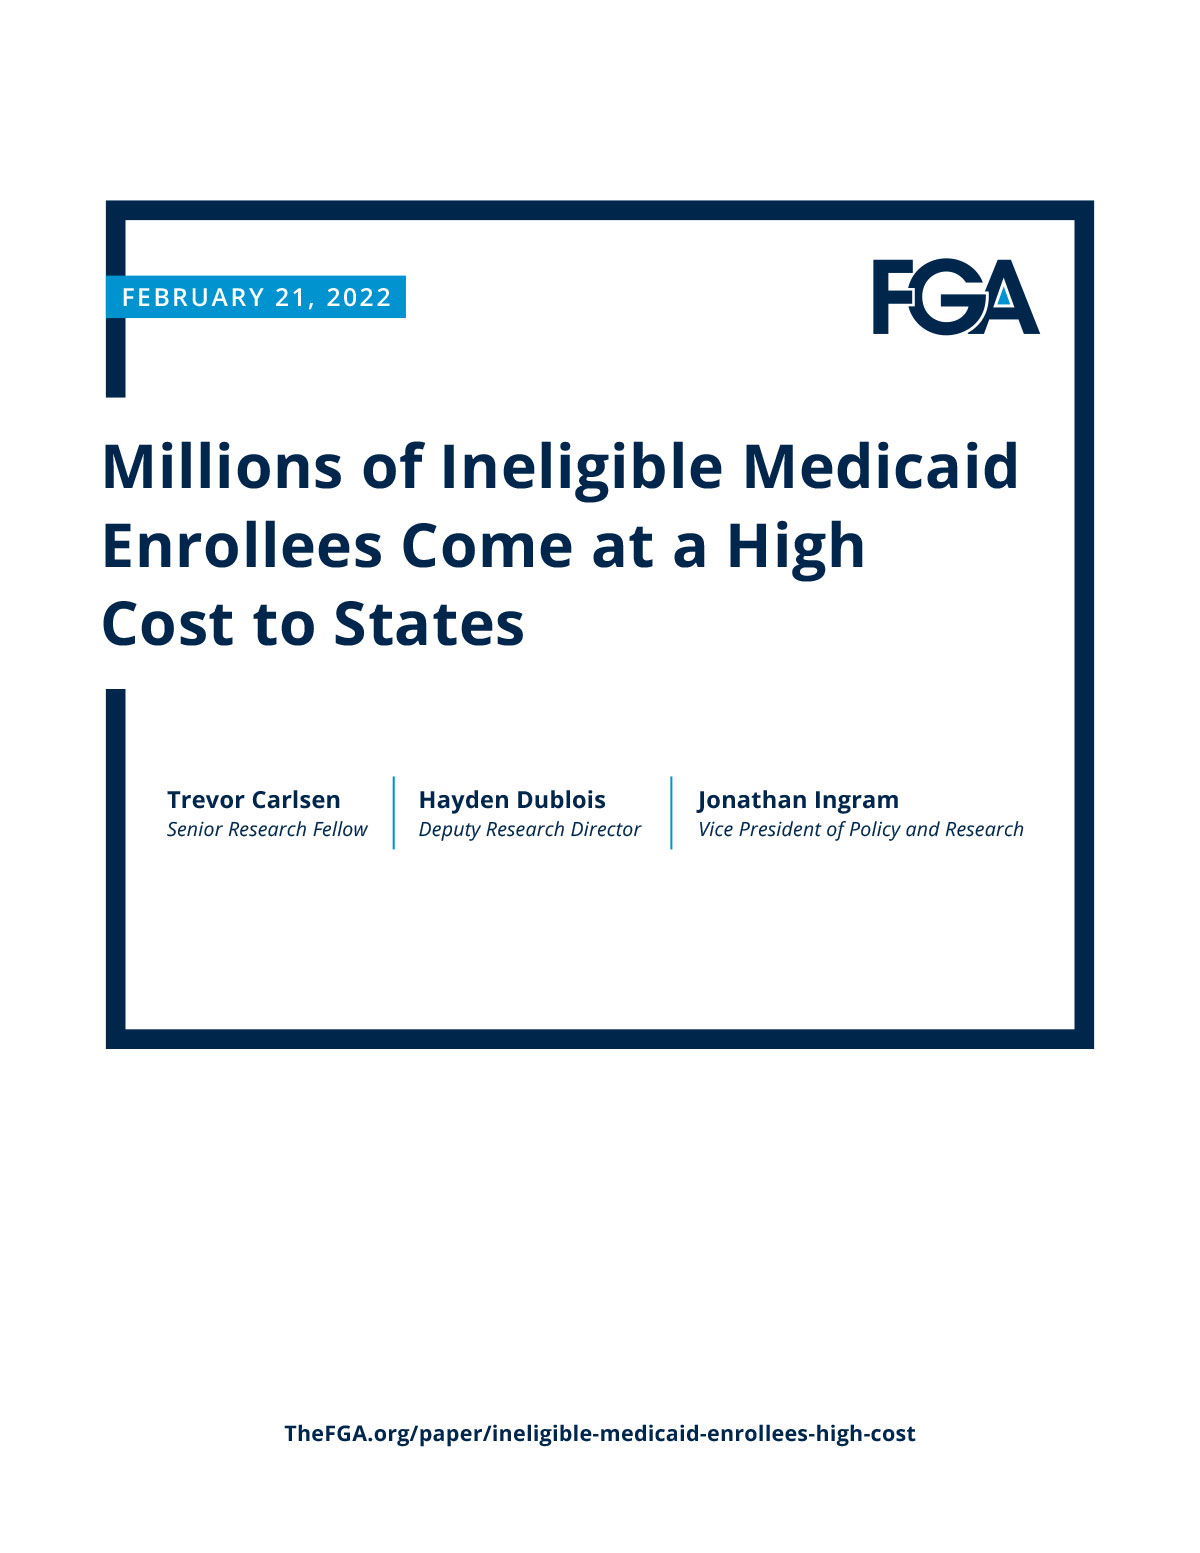 Millions of Ineligible Medicaid Enrollees Come at a High Cost to States